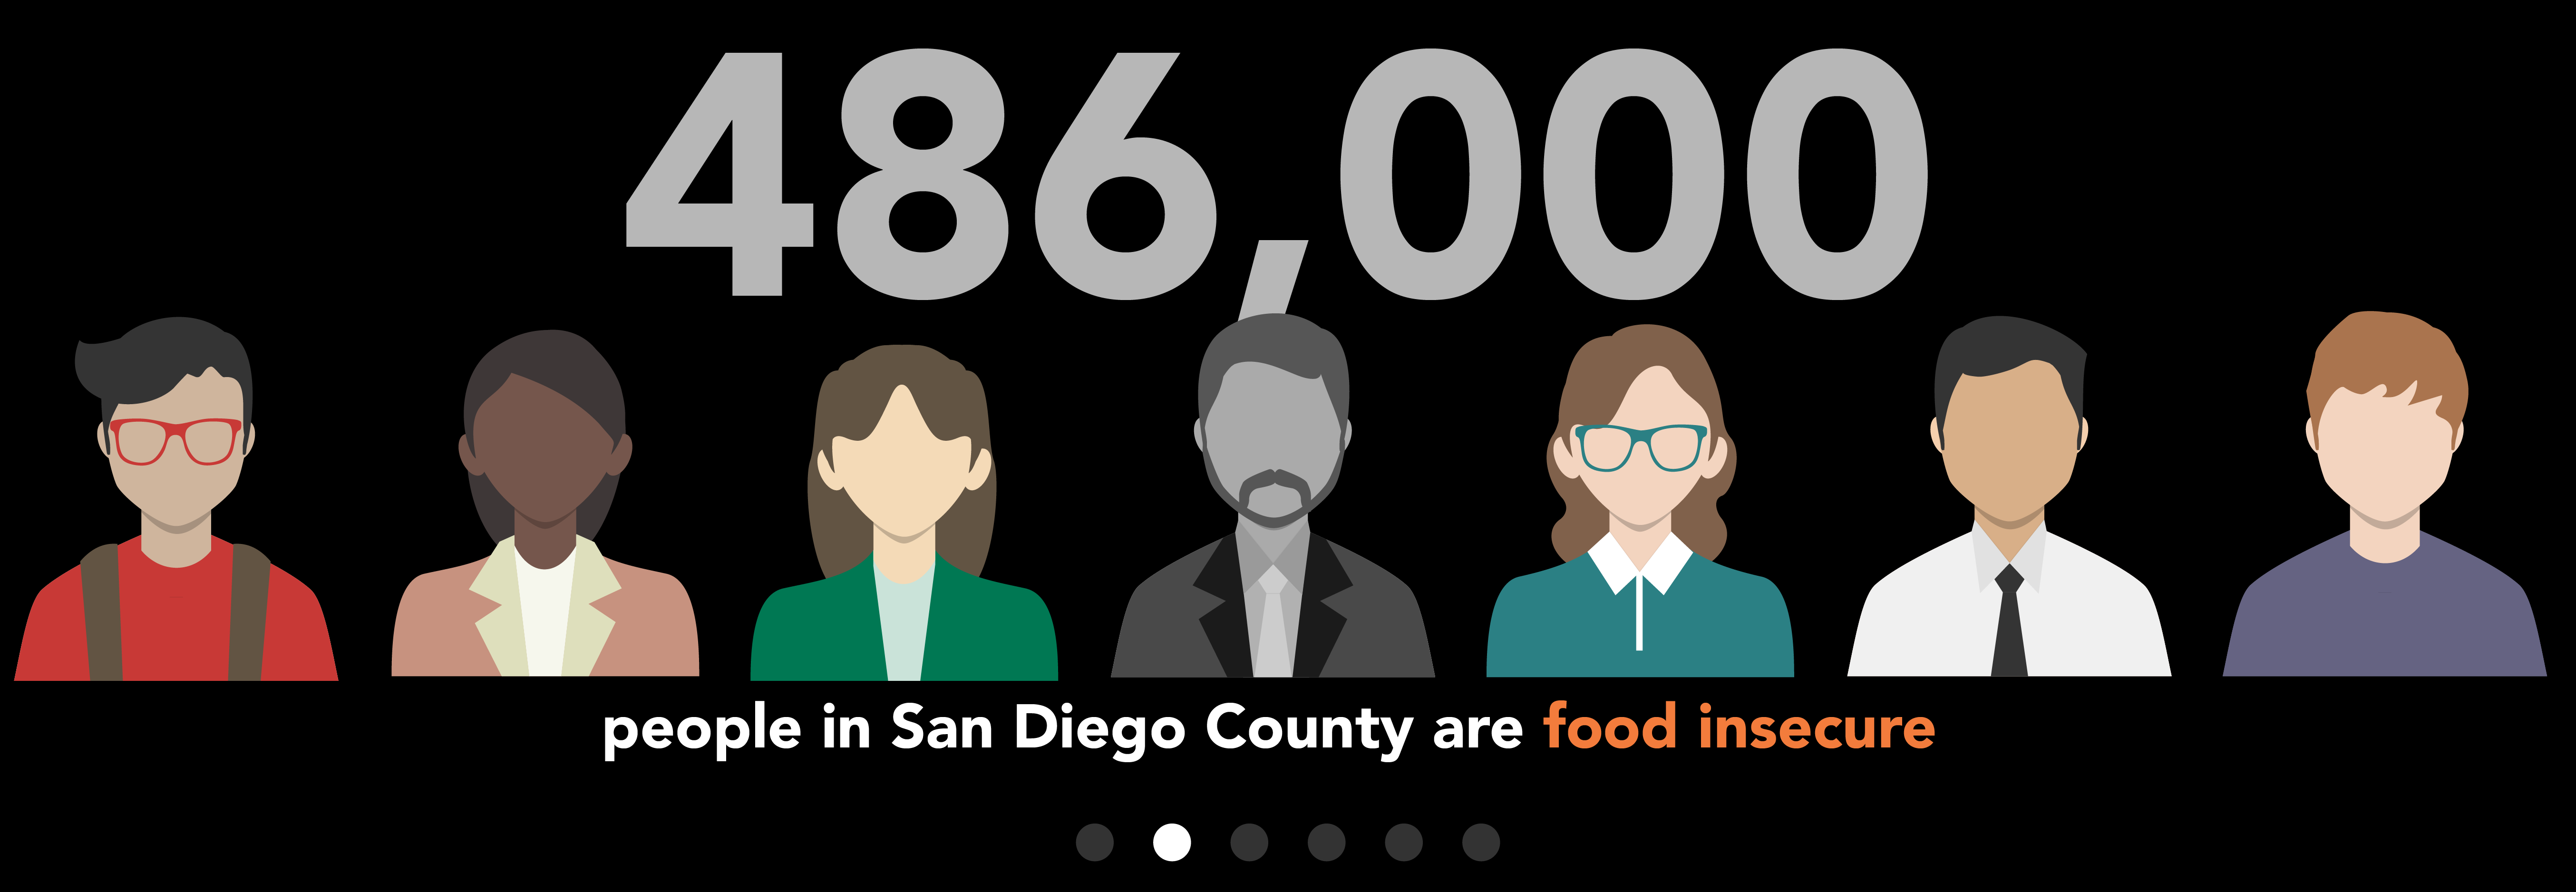 food insecurity in san diego